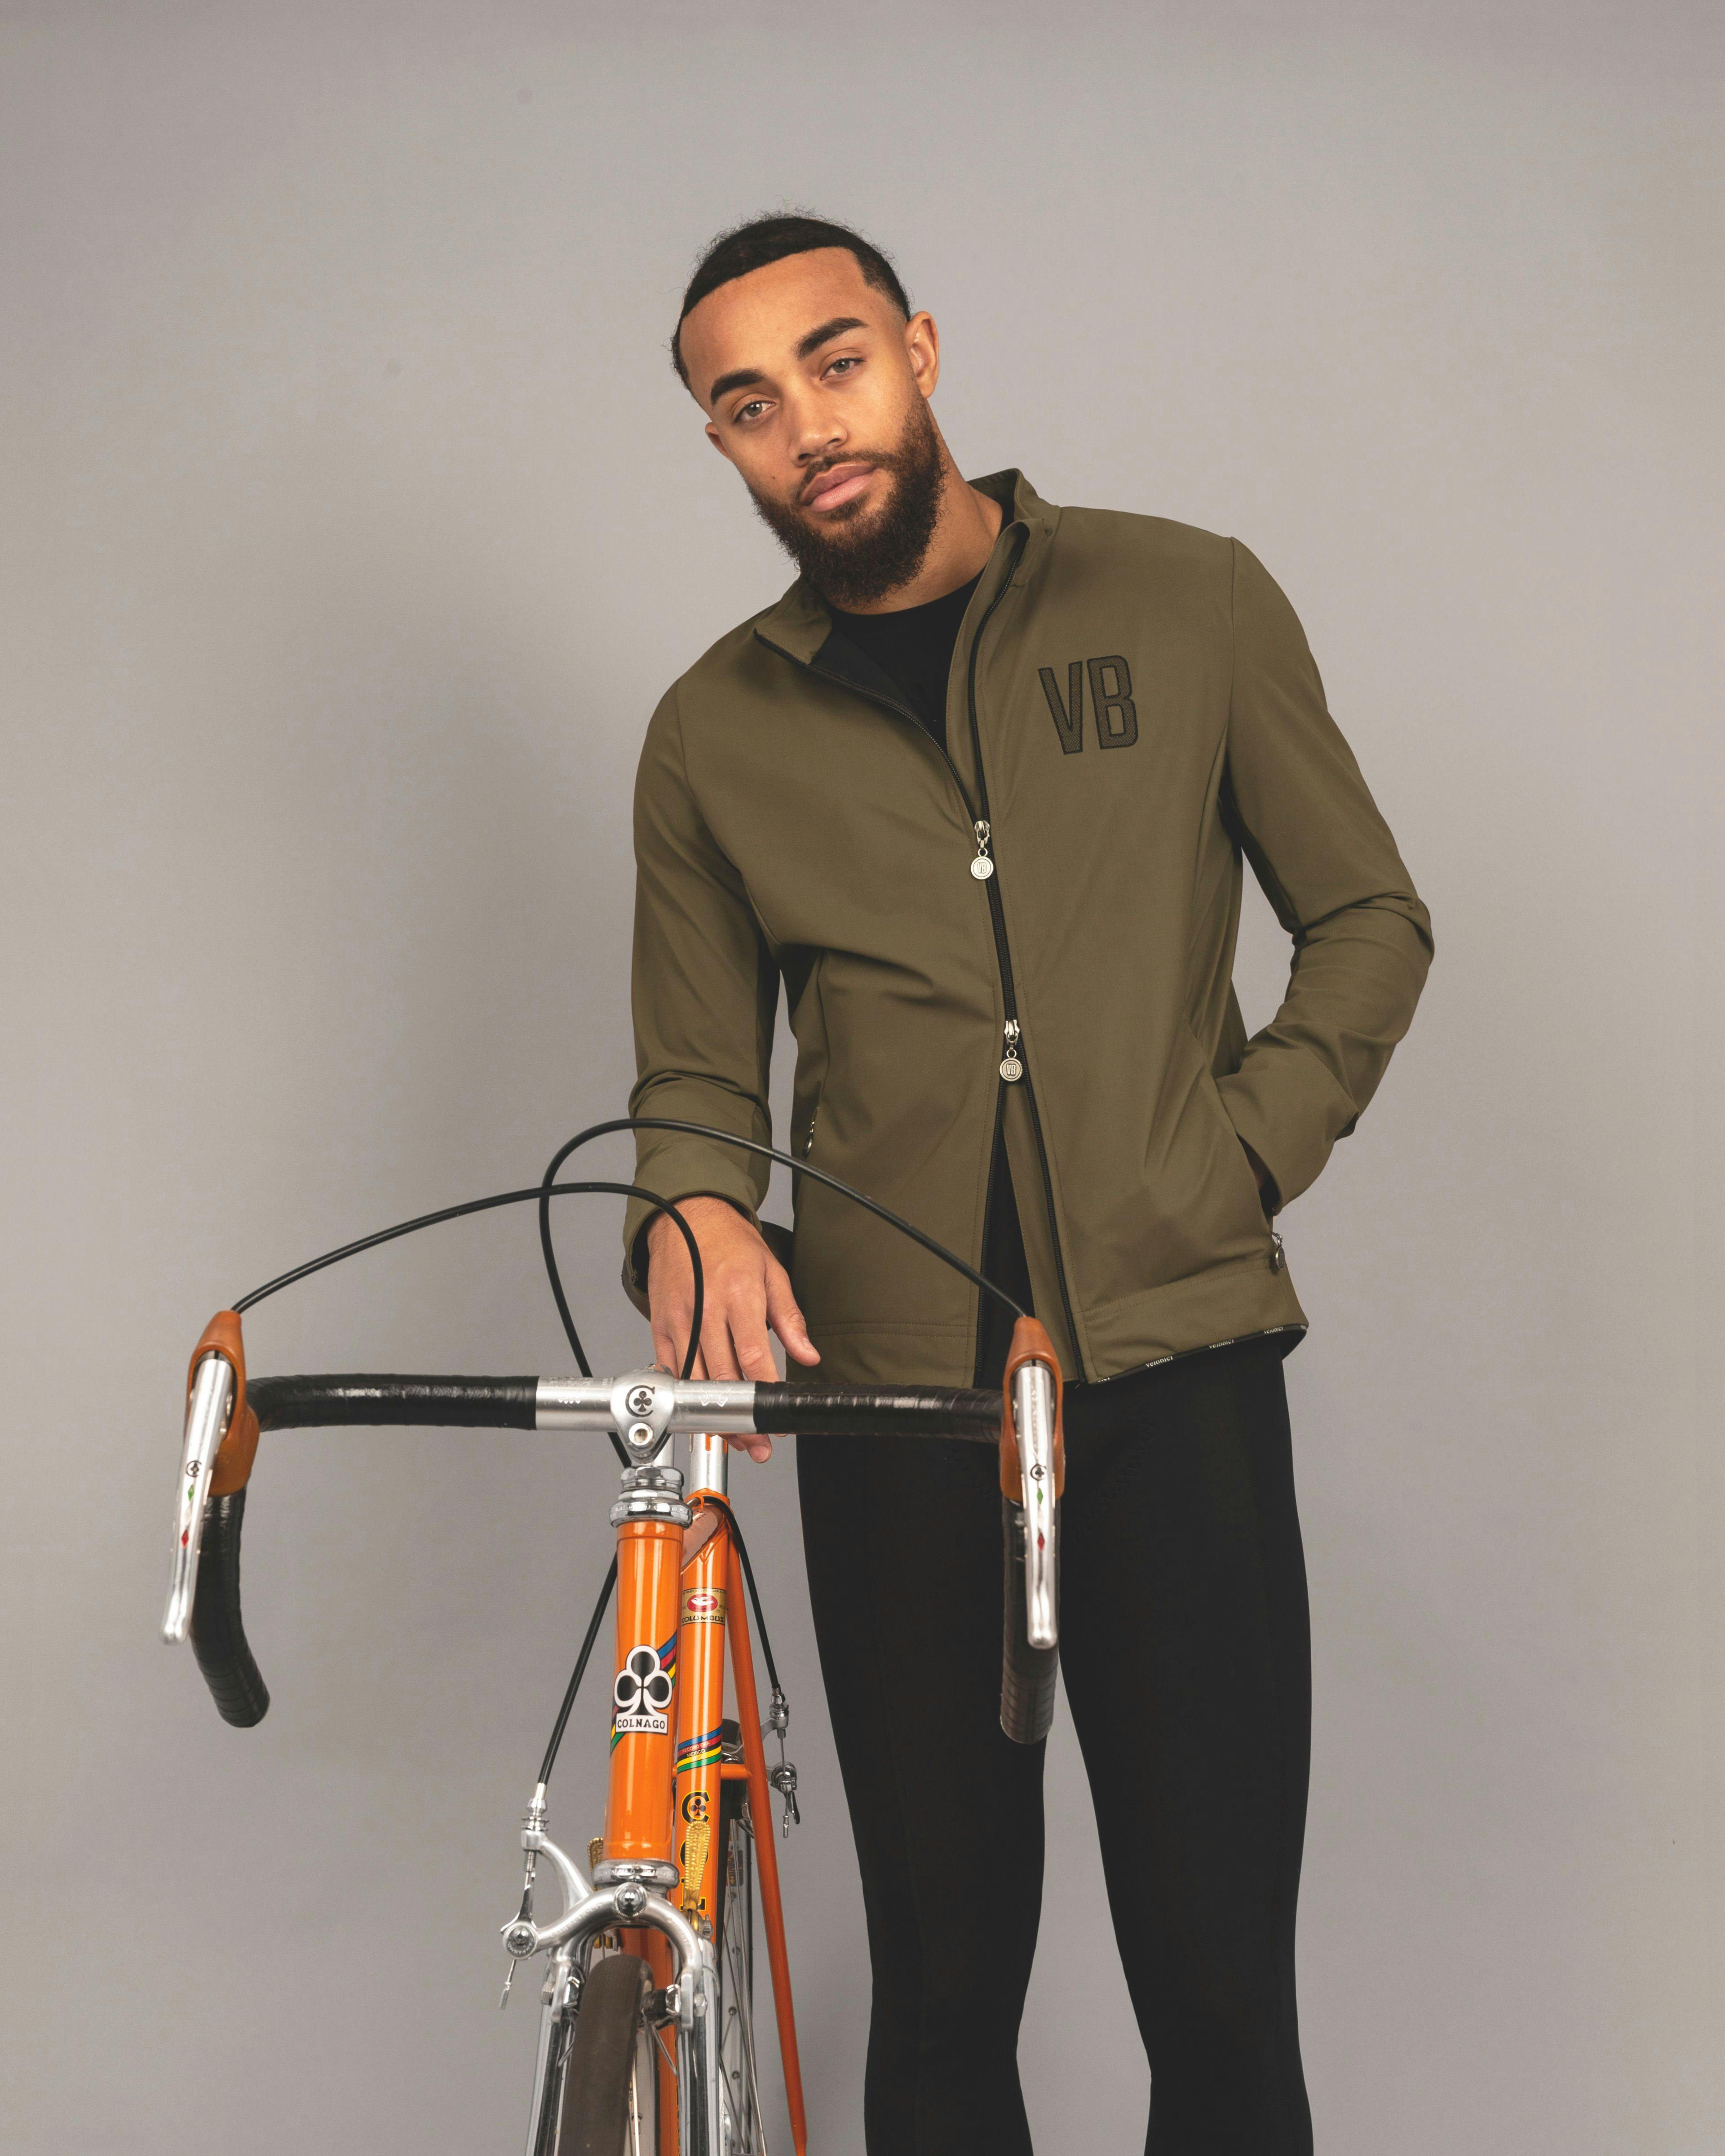 Meet Alfred, our new city riding jacket